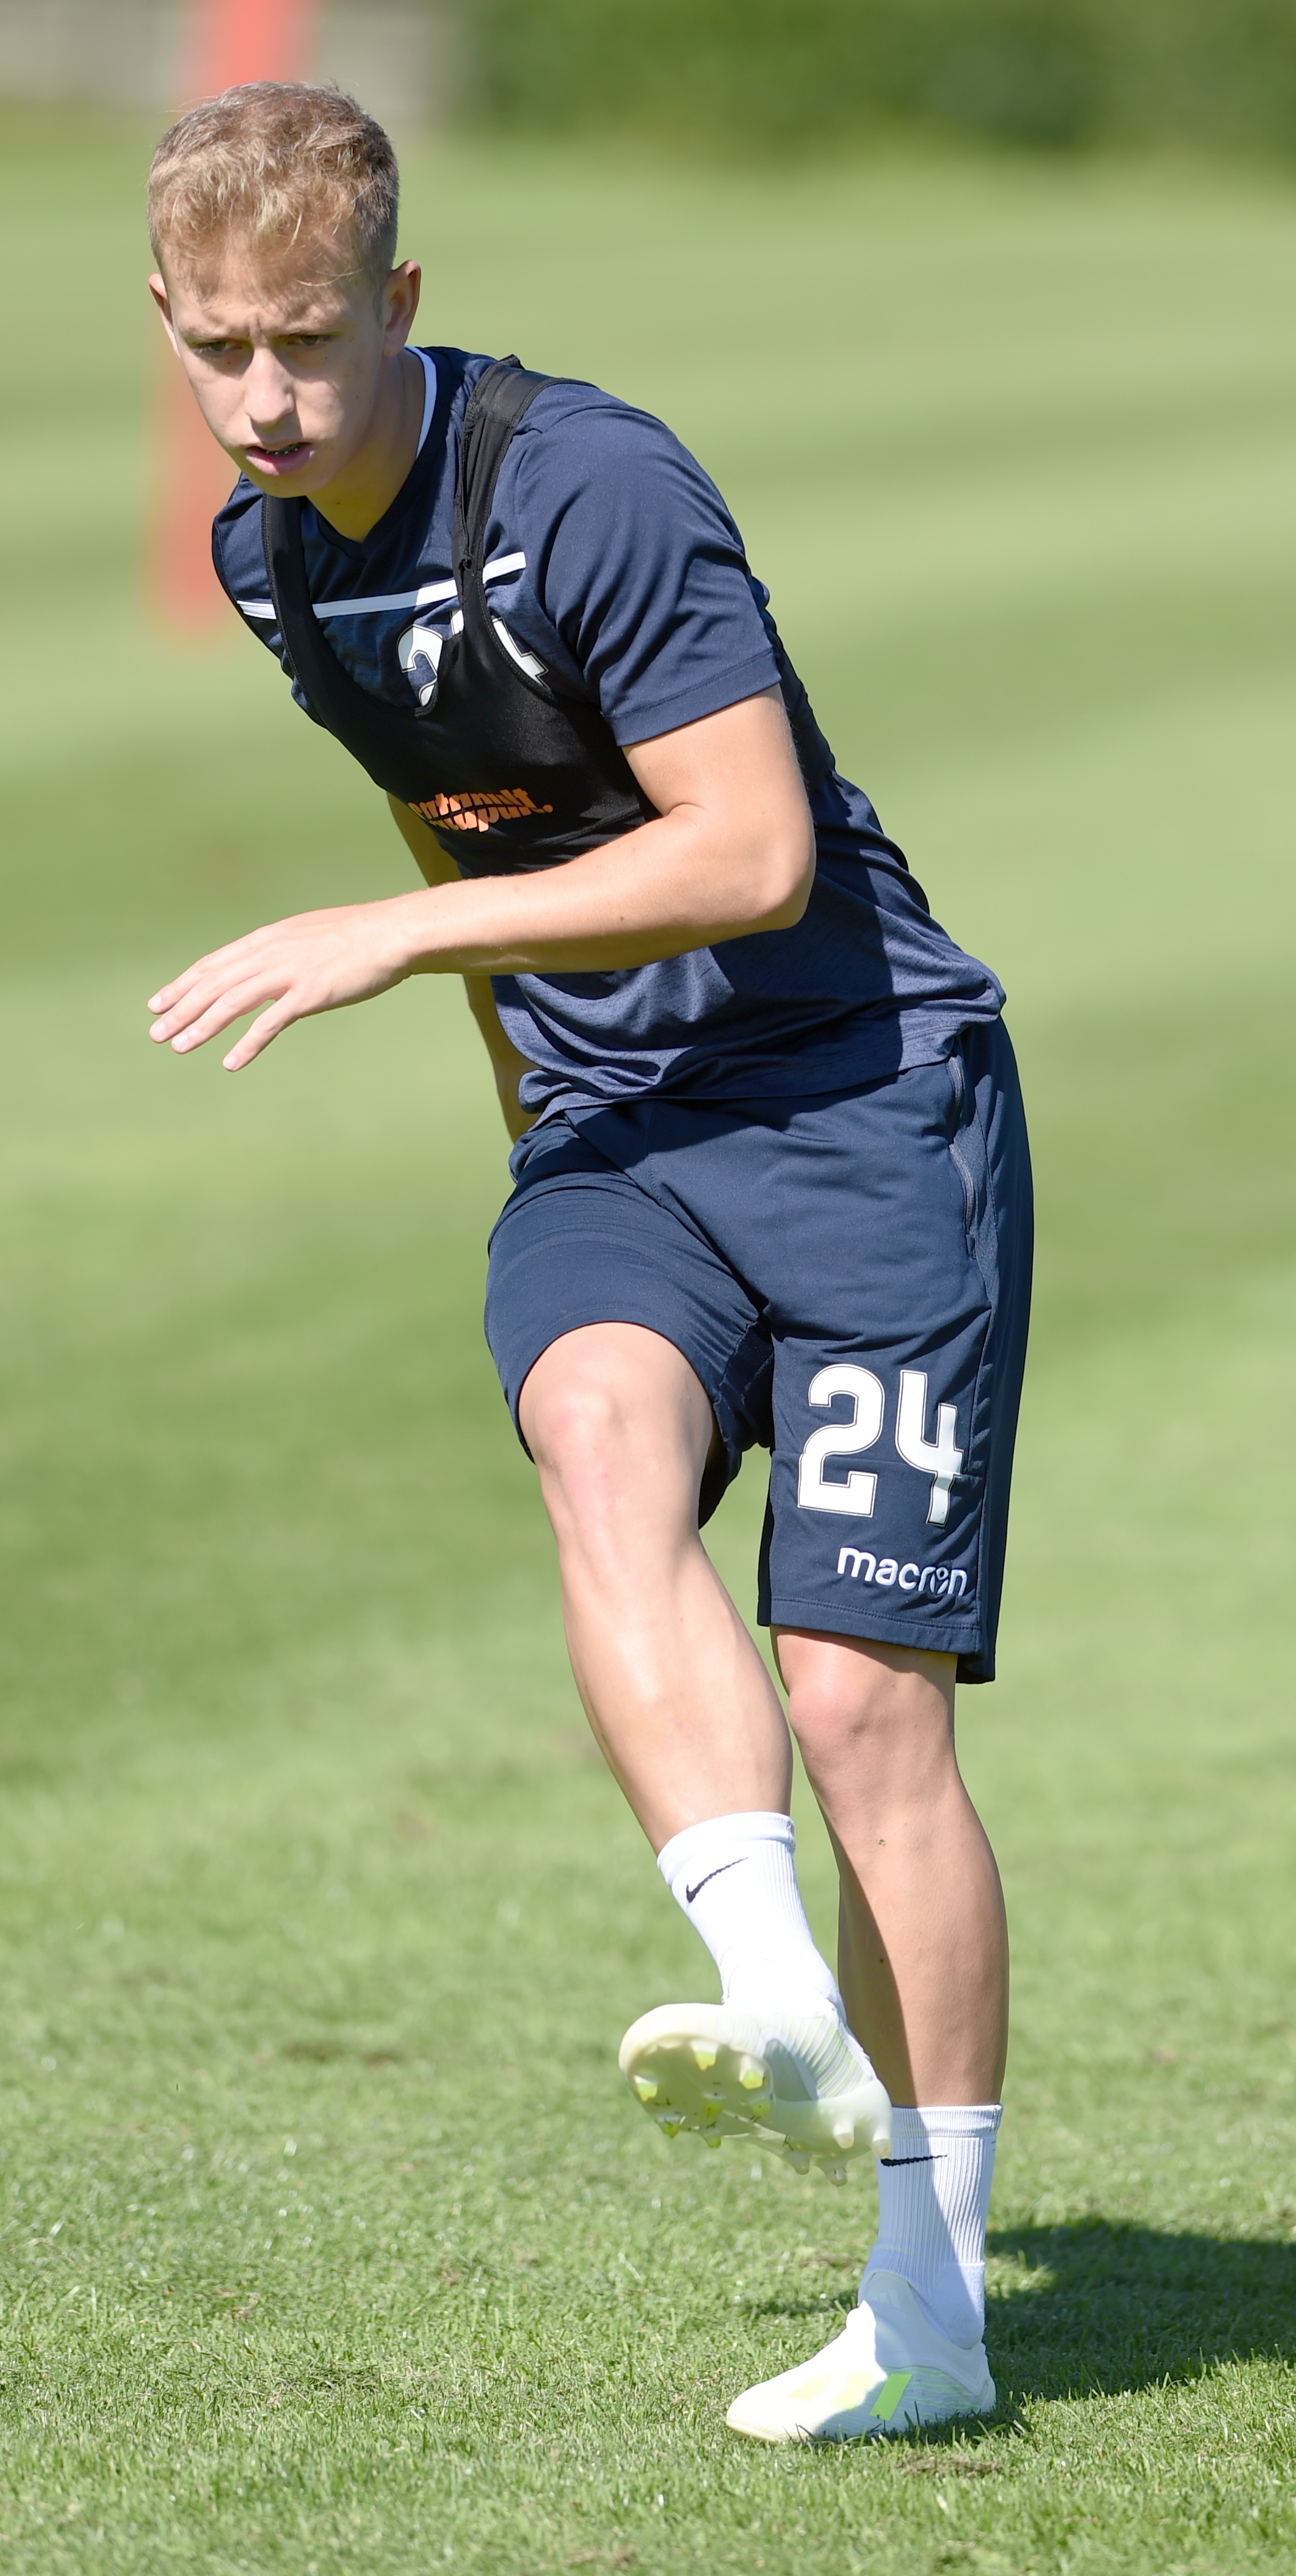 Picture by SANDY McCOOK  27th June '19
Ross County in pre season training.  Harry Paton.